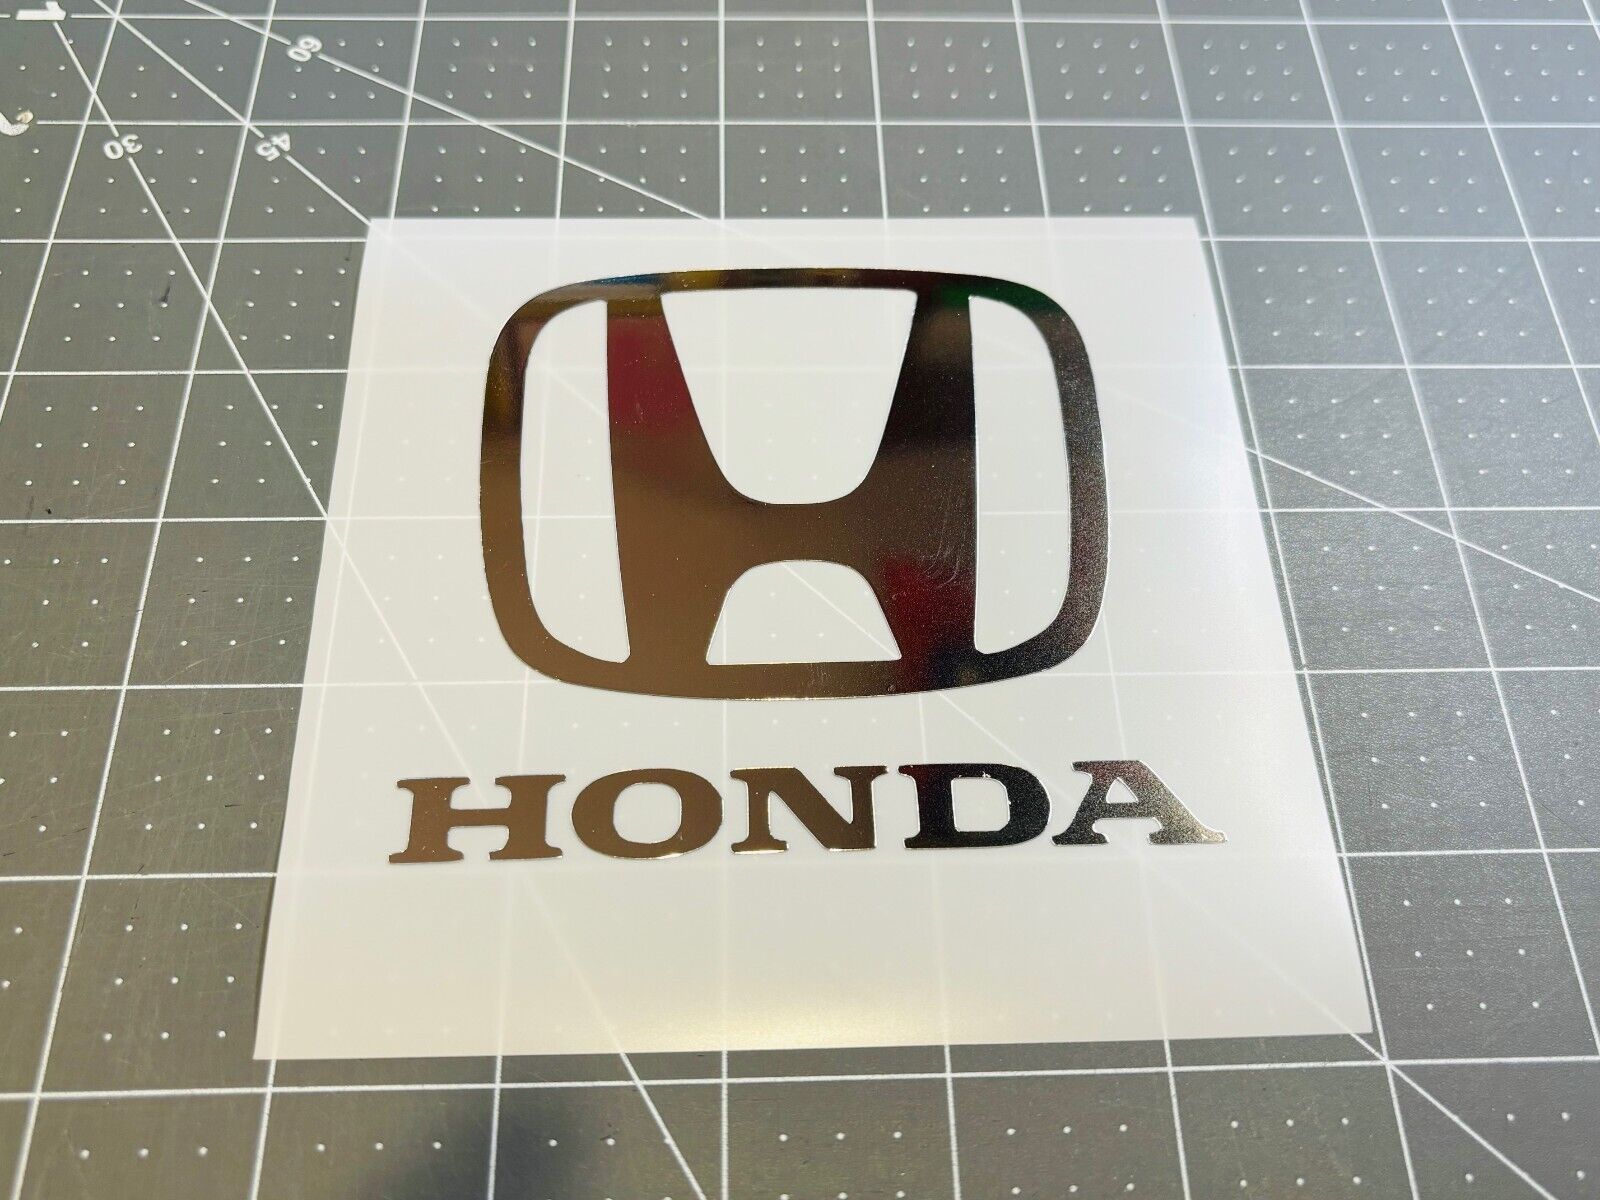 Honda Vinyl Decal In Large Sizes, Many Colors Avail Buy 2 Get 1 FREE & 